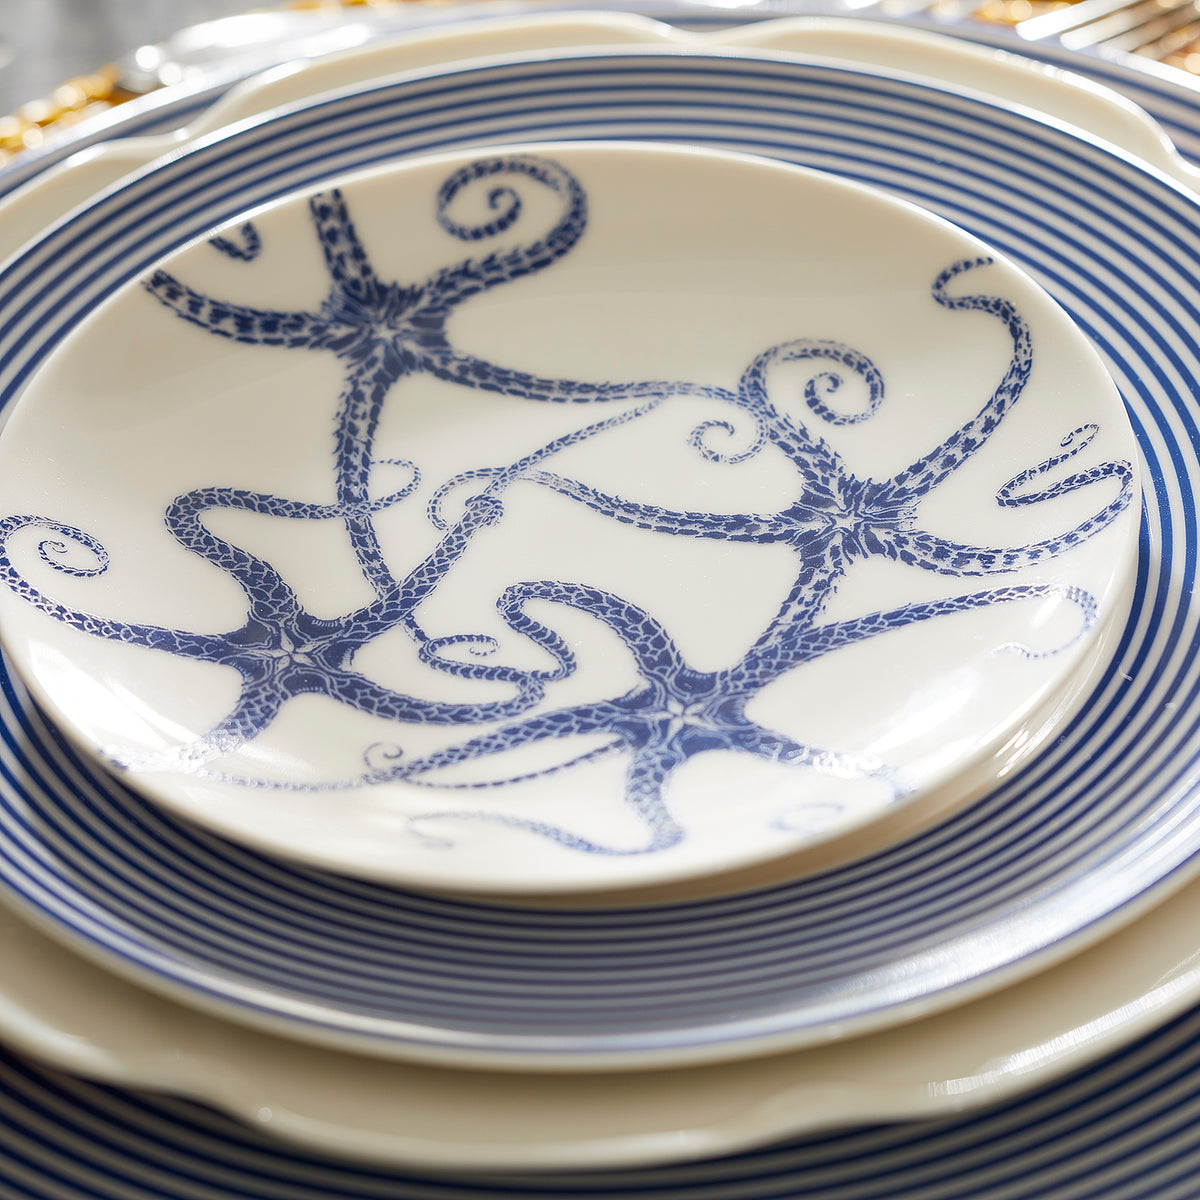 A close-up of stacked heirloom-quality dinnerware in lead-free porcelain with blue nautical designs. The top plate features blue octopus illustrations, while the plates underneath have blue striped patterns. The product shown is Starfish Small Plates by Caskata Artisanal Home.